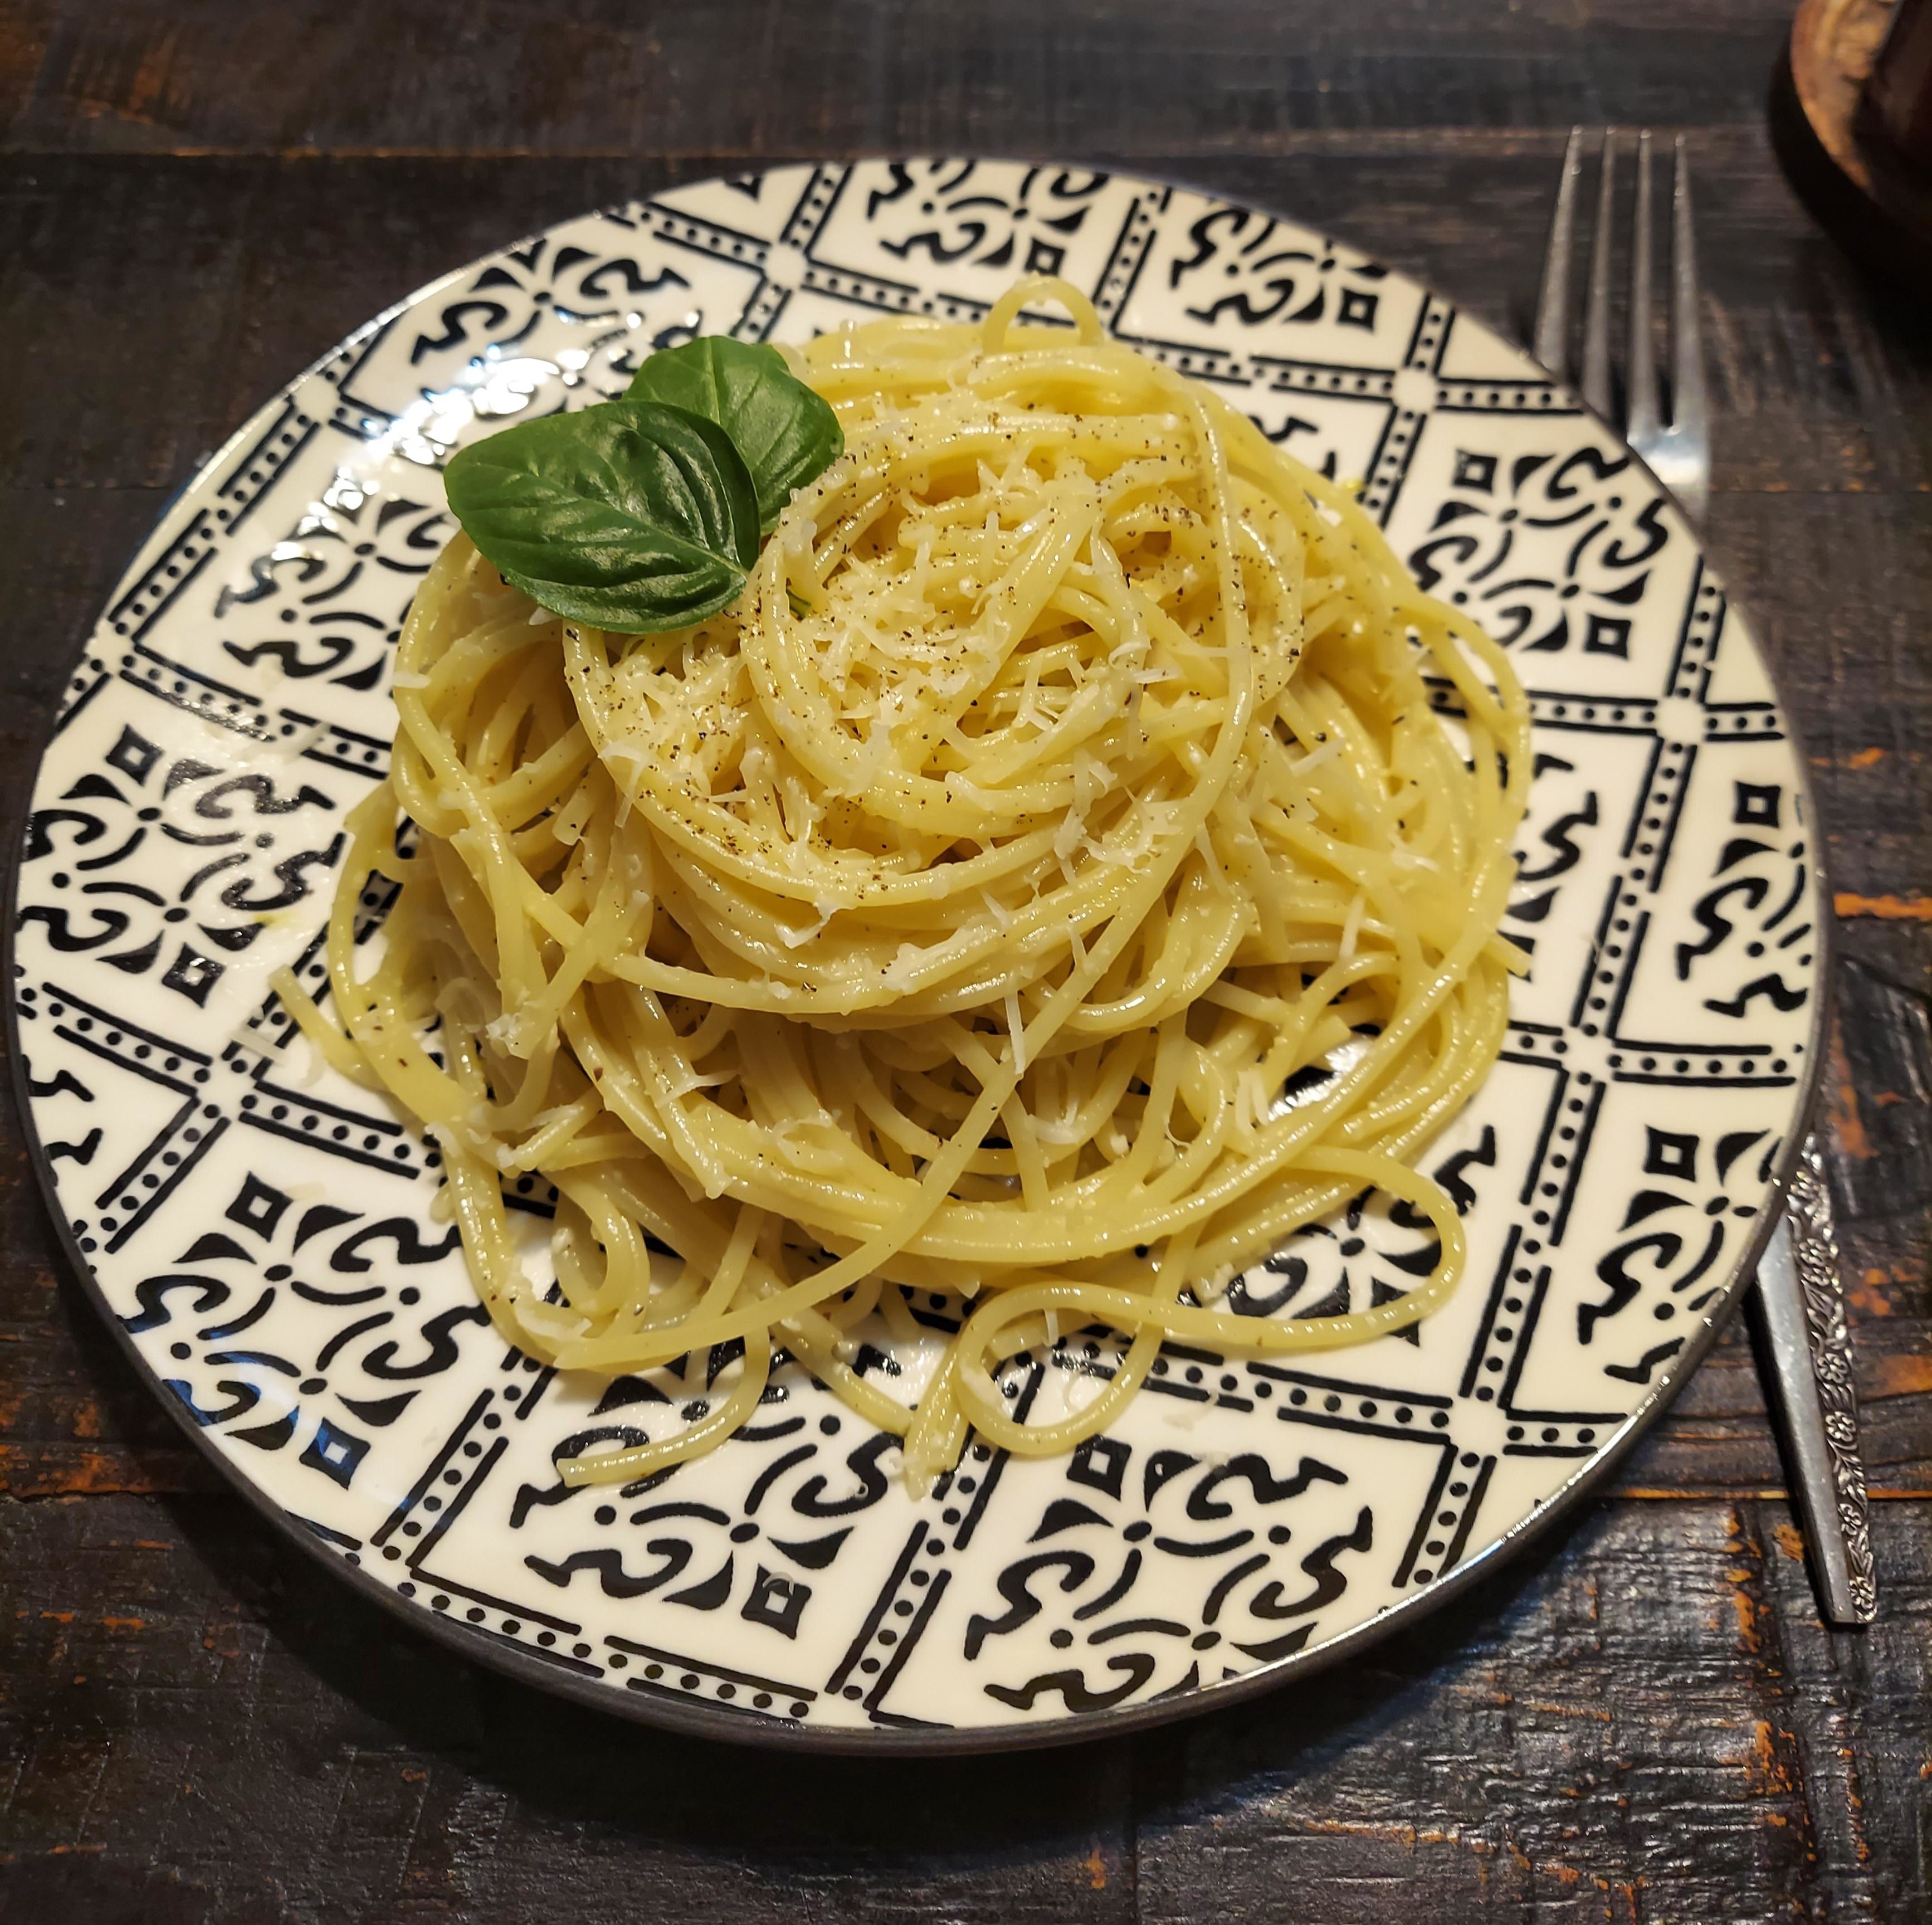 a plate of lemon spaghetti topped with shredded parmesan cheese and basil